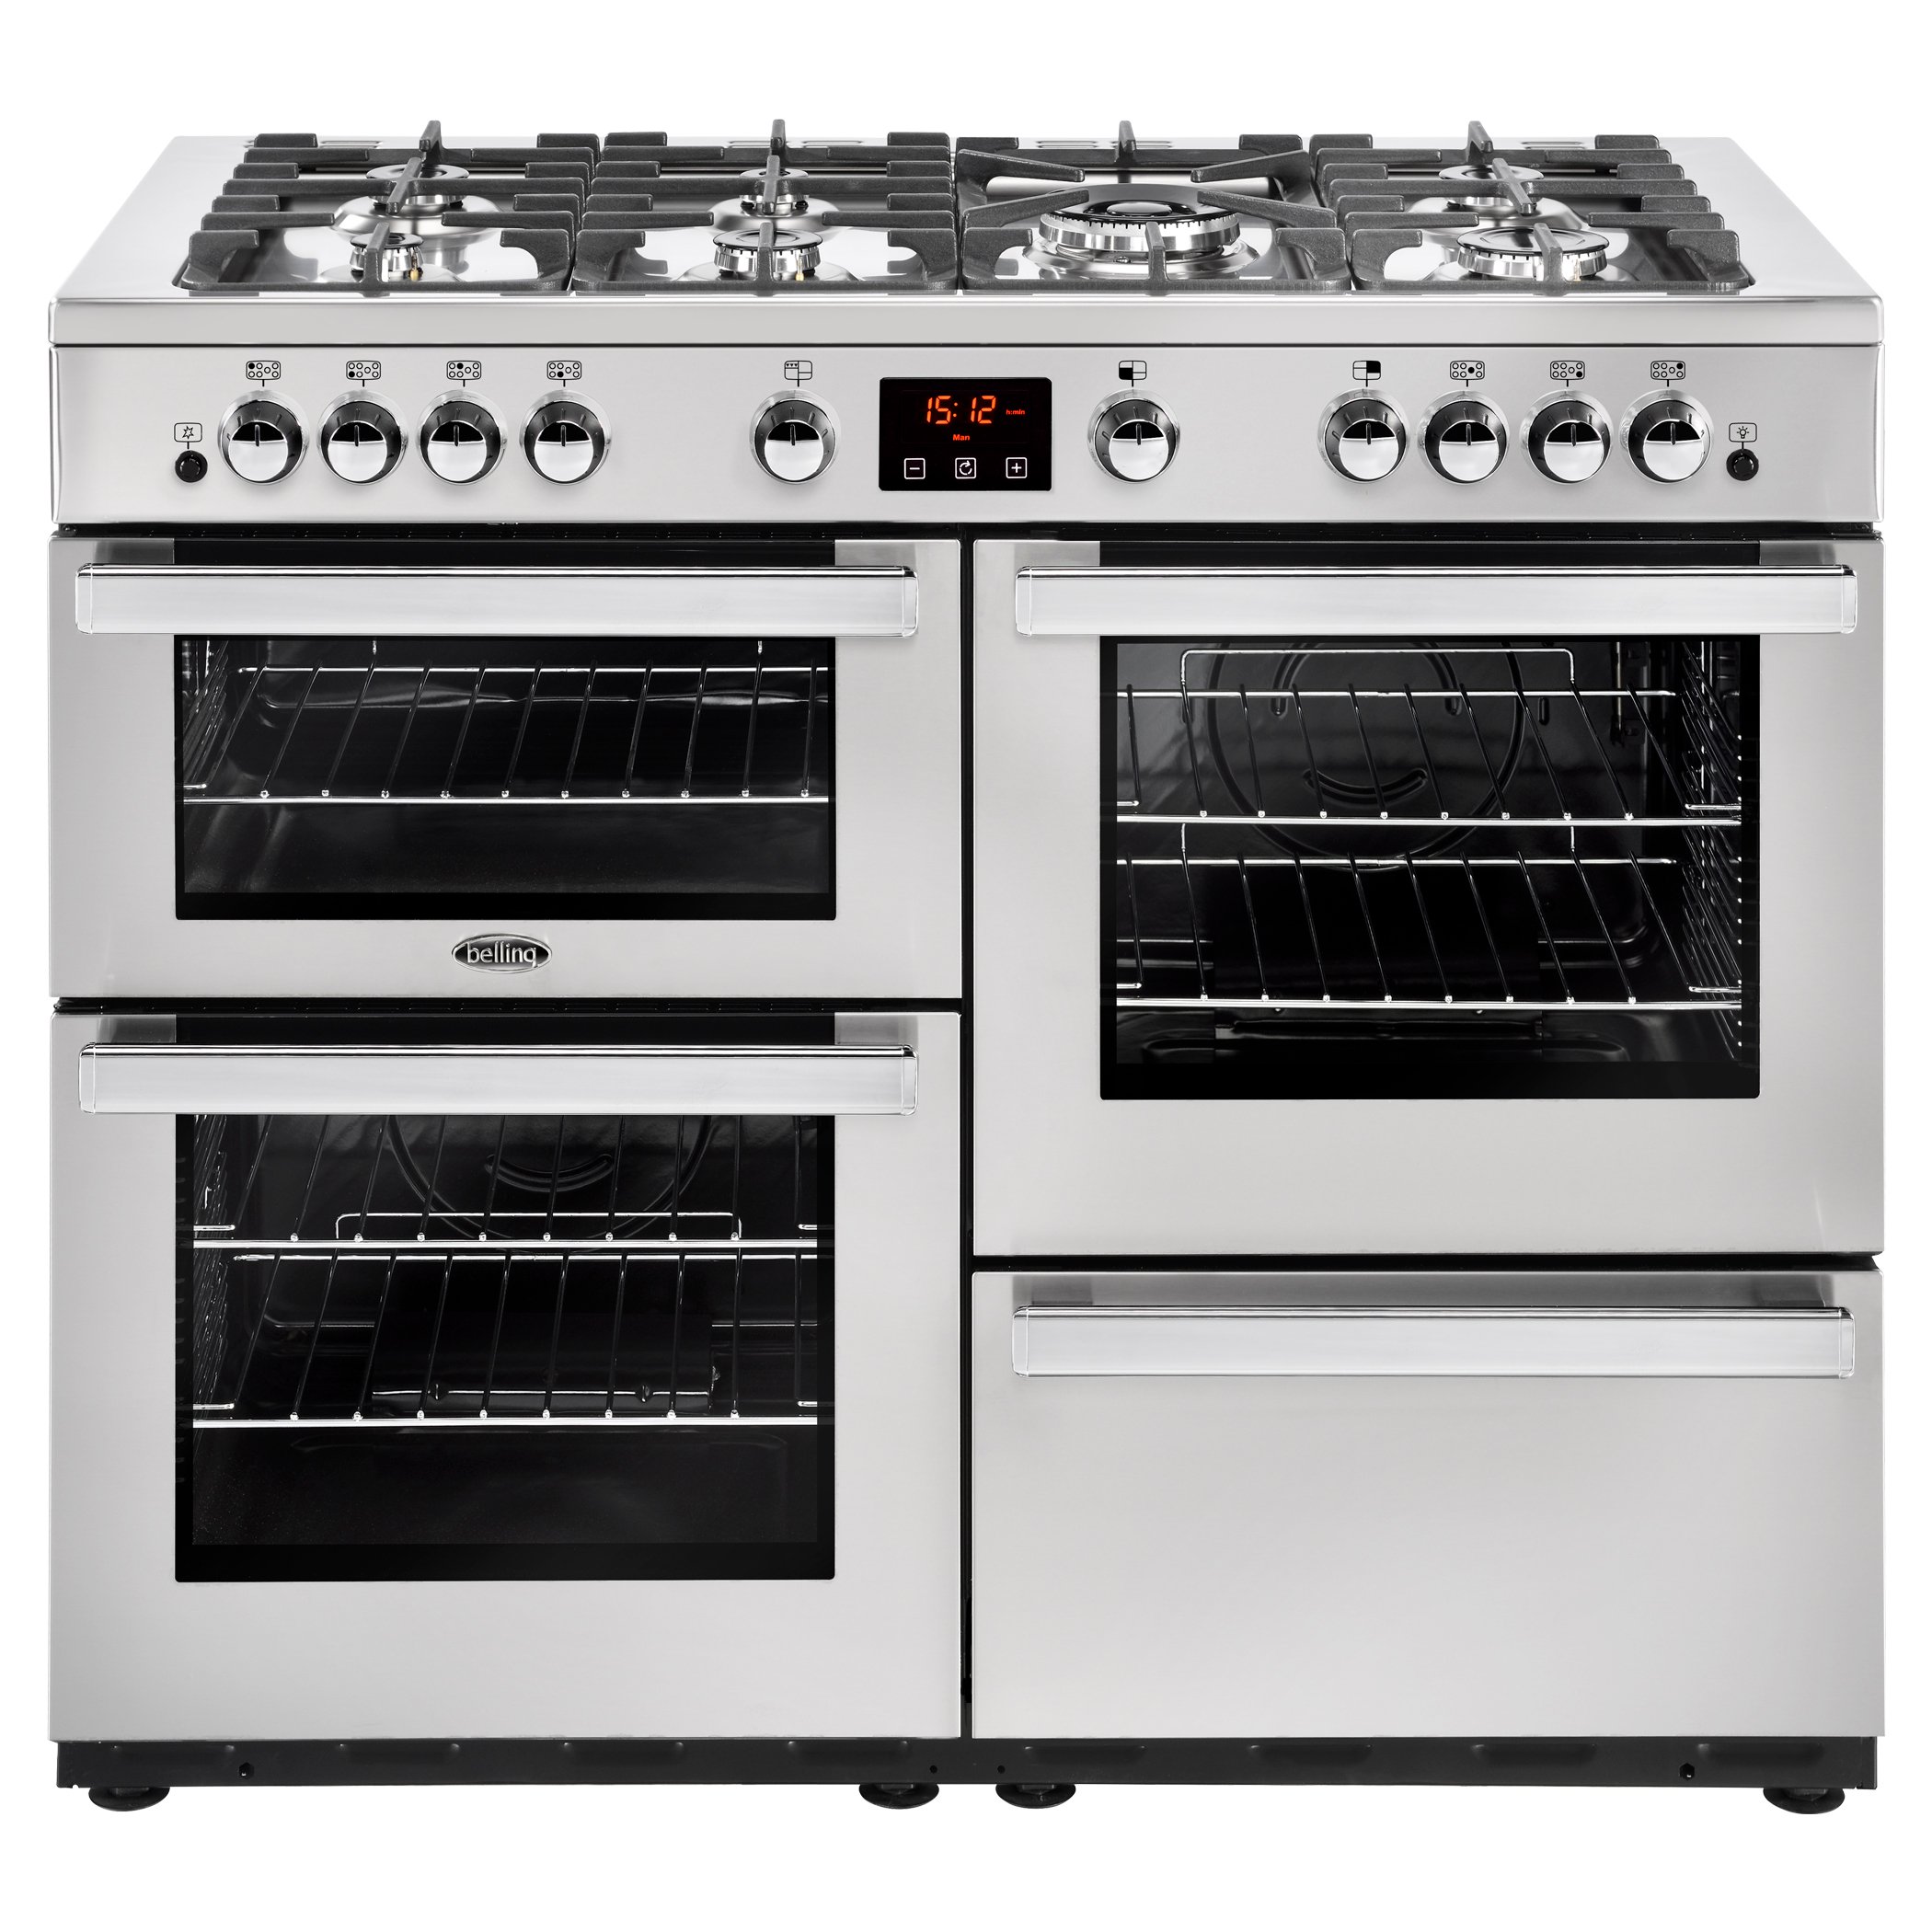 110cm gas range cooker with 7 burner gas hob with 4kW PowerWok burner, Maxi-Clock and easy clean enamel.